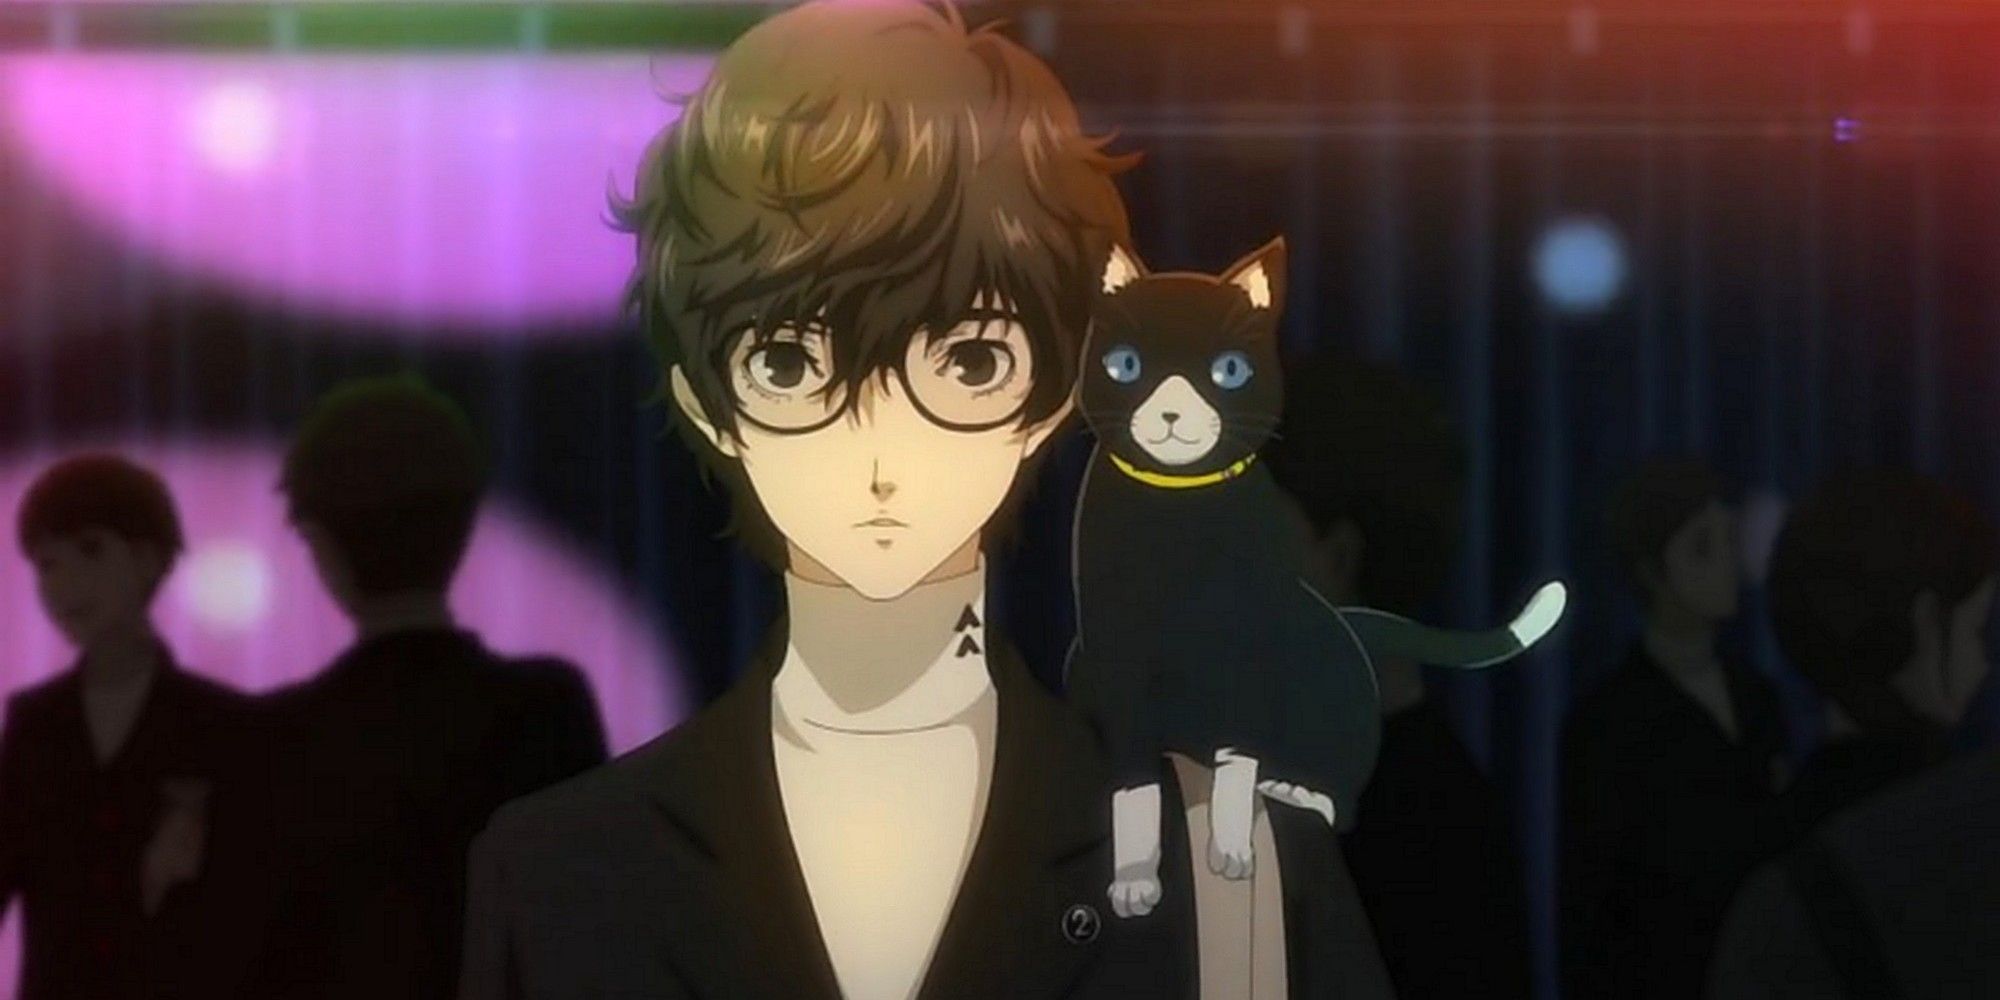 persona 5 royal joker and morgana from the anime at a club